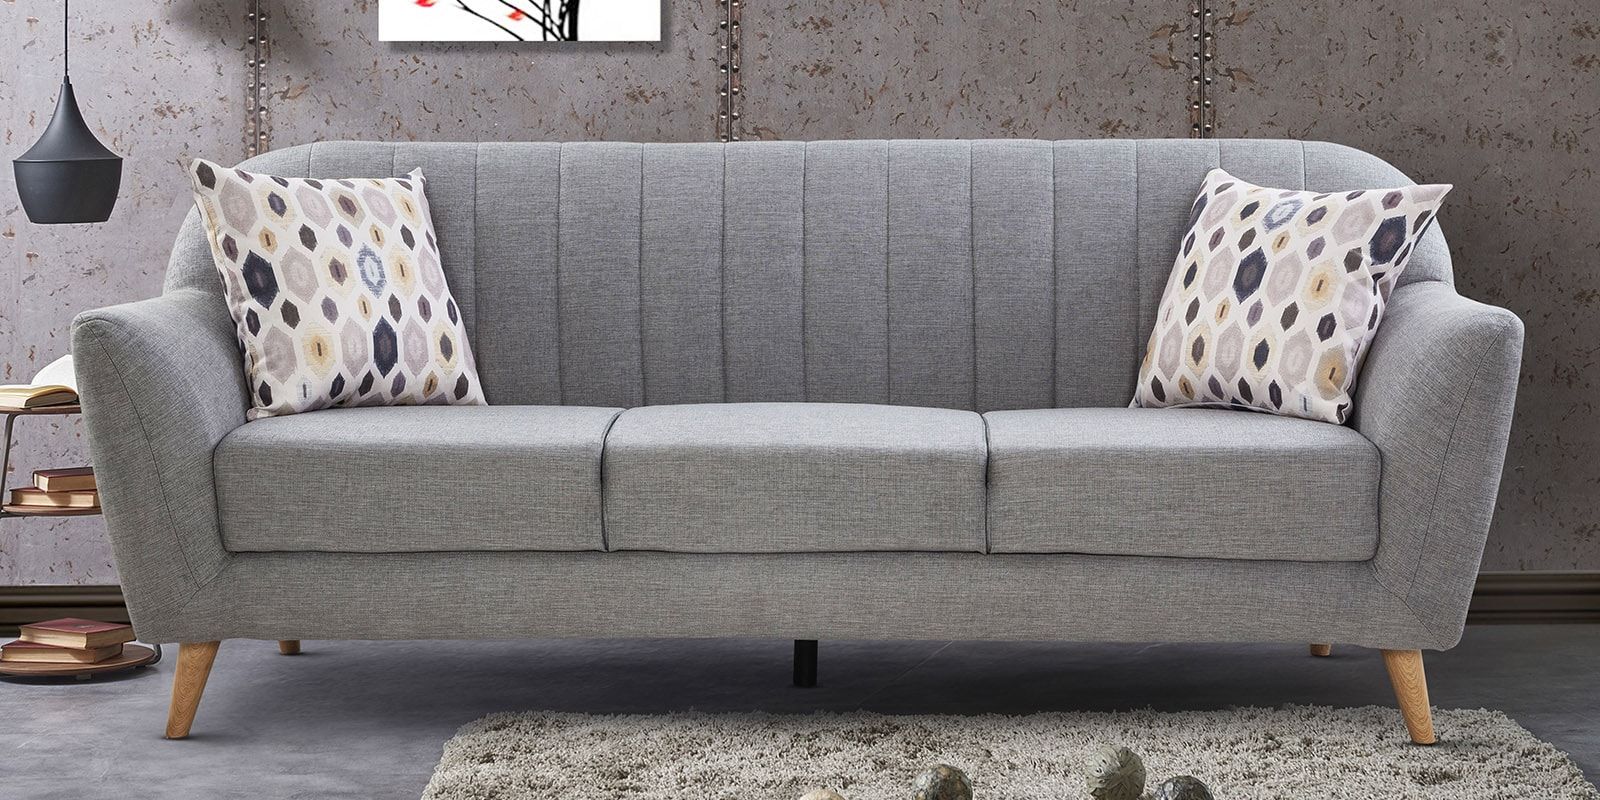 Buy Antalya 3 Seater Sofa In Grey Coloururban Living Online – Mid Regarding Mid Century 3 Seat Couches (Gallery 4 of 20)